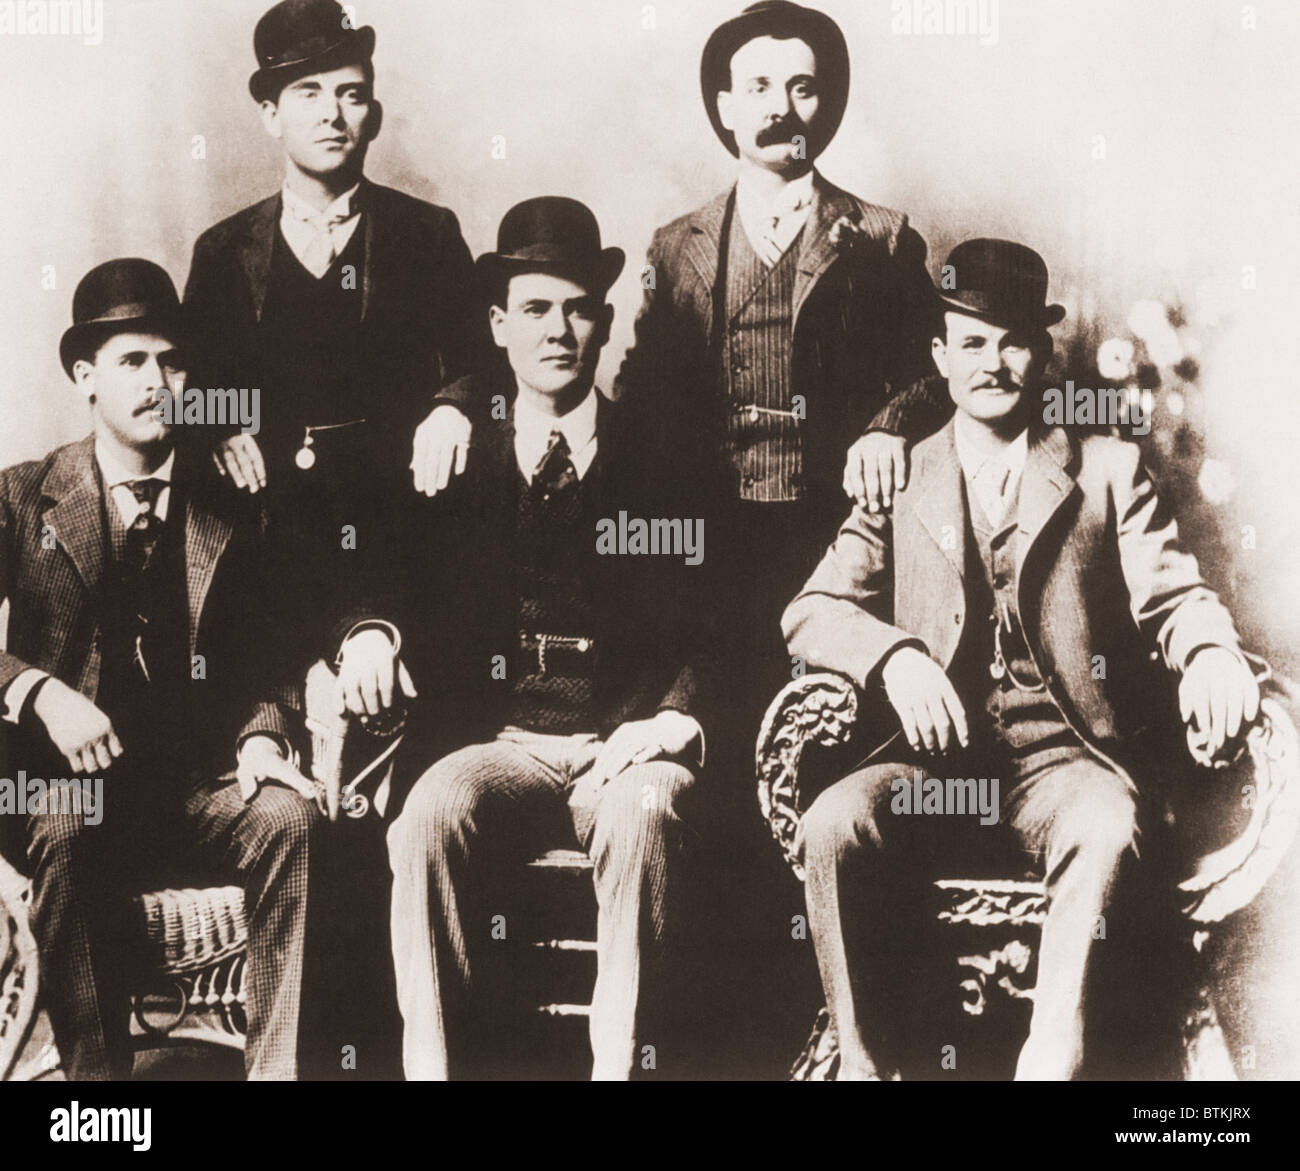 Butch Cassidy's Wild Bunch gang of train robbers in portrait taken in Fort Worth, Texas in 1901. Left to right, seated: Harry A. Longabaugh, alias the Sundance Kid, Ben Kilpatrick, alias the Tall Texan, Robert Leroy Parker, alias Butch Cassidy. Standing- Will Carver, alias News Carver and Harvey Logan, alias Kid Curry. Paul Neuman and Robert Redford starred in the 1967 film, BUTCH CASSIDY AND THE SUNDANCE KID. Stock Photo